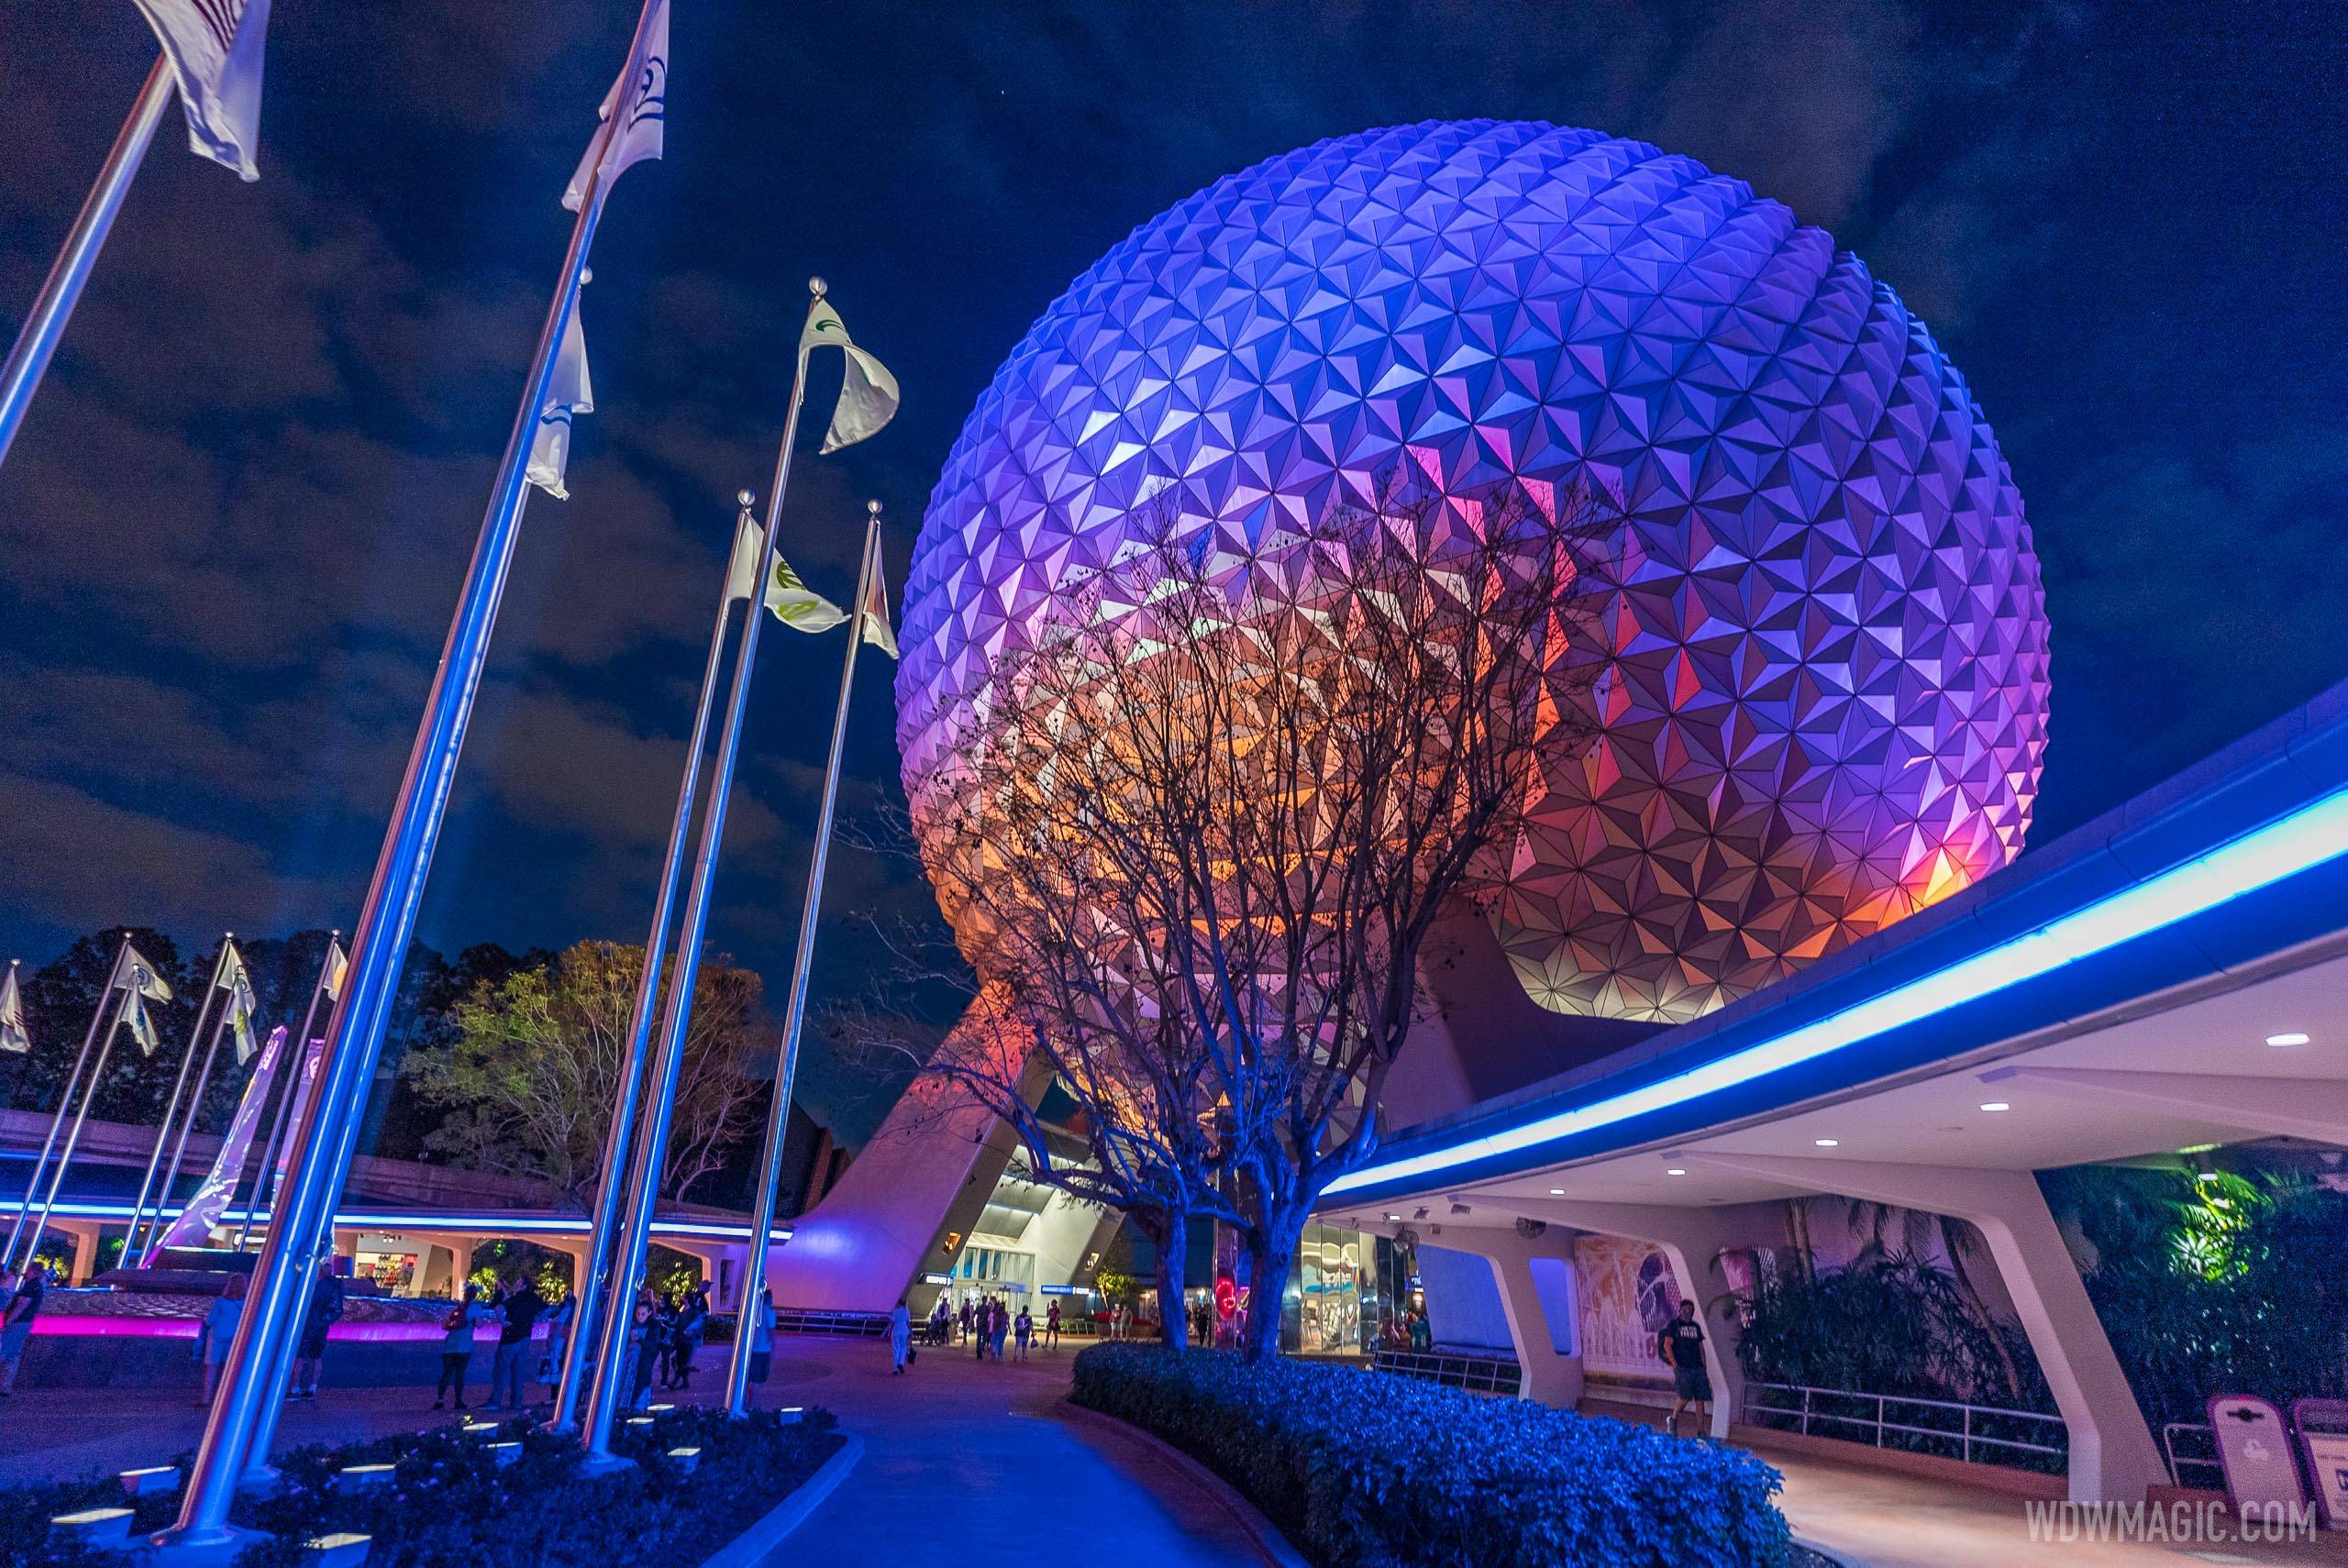 VIDEO - New perimeter lighting package on show at EPCOT'S main entrance